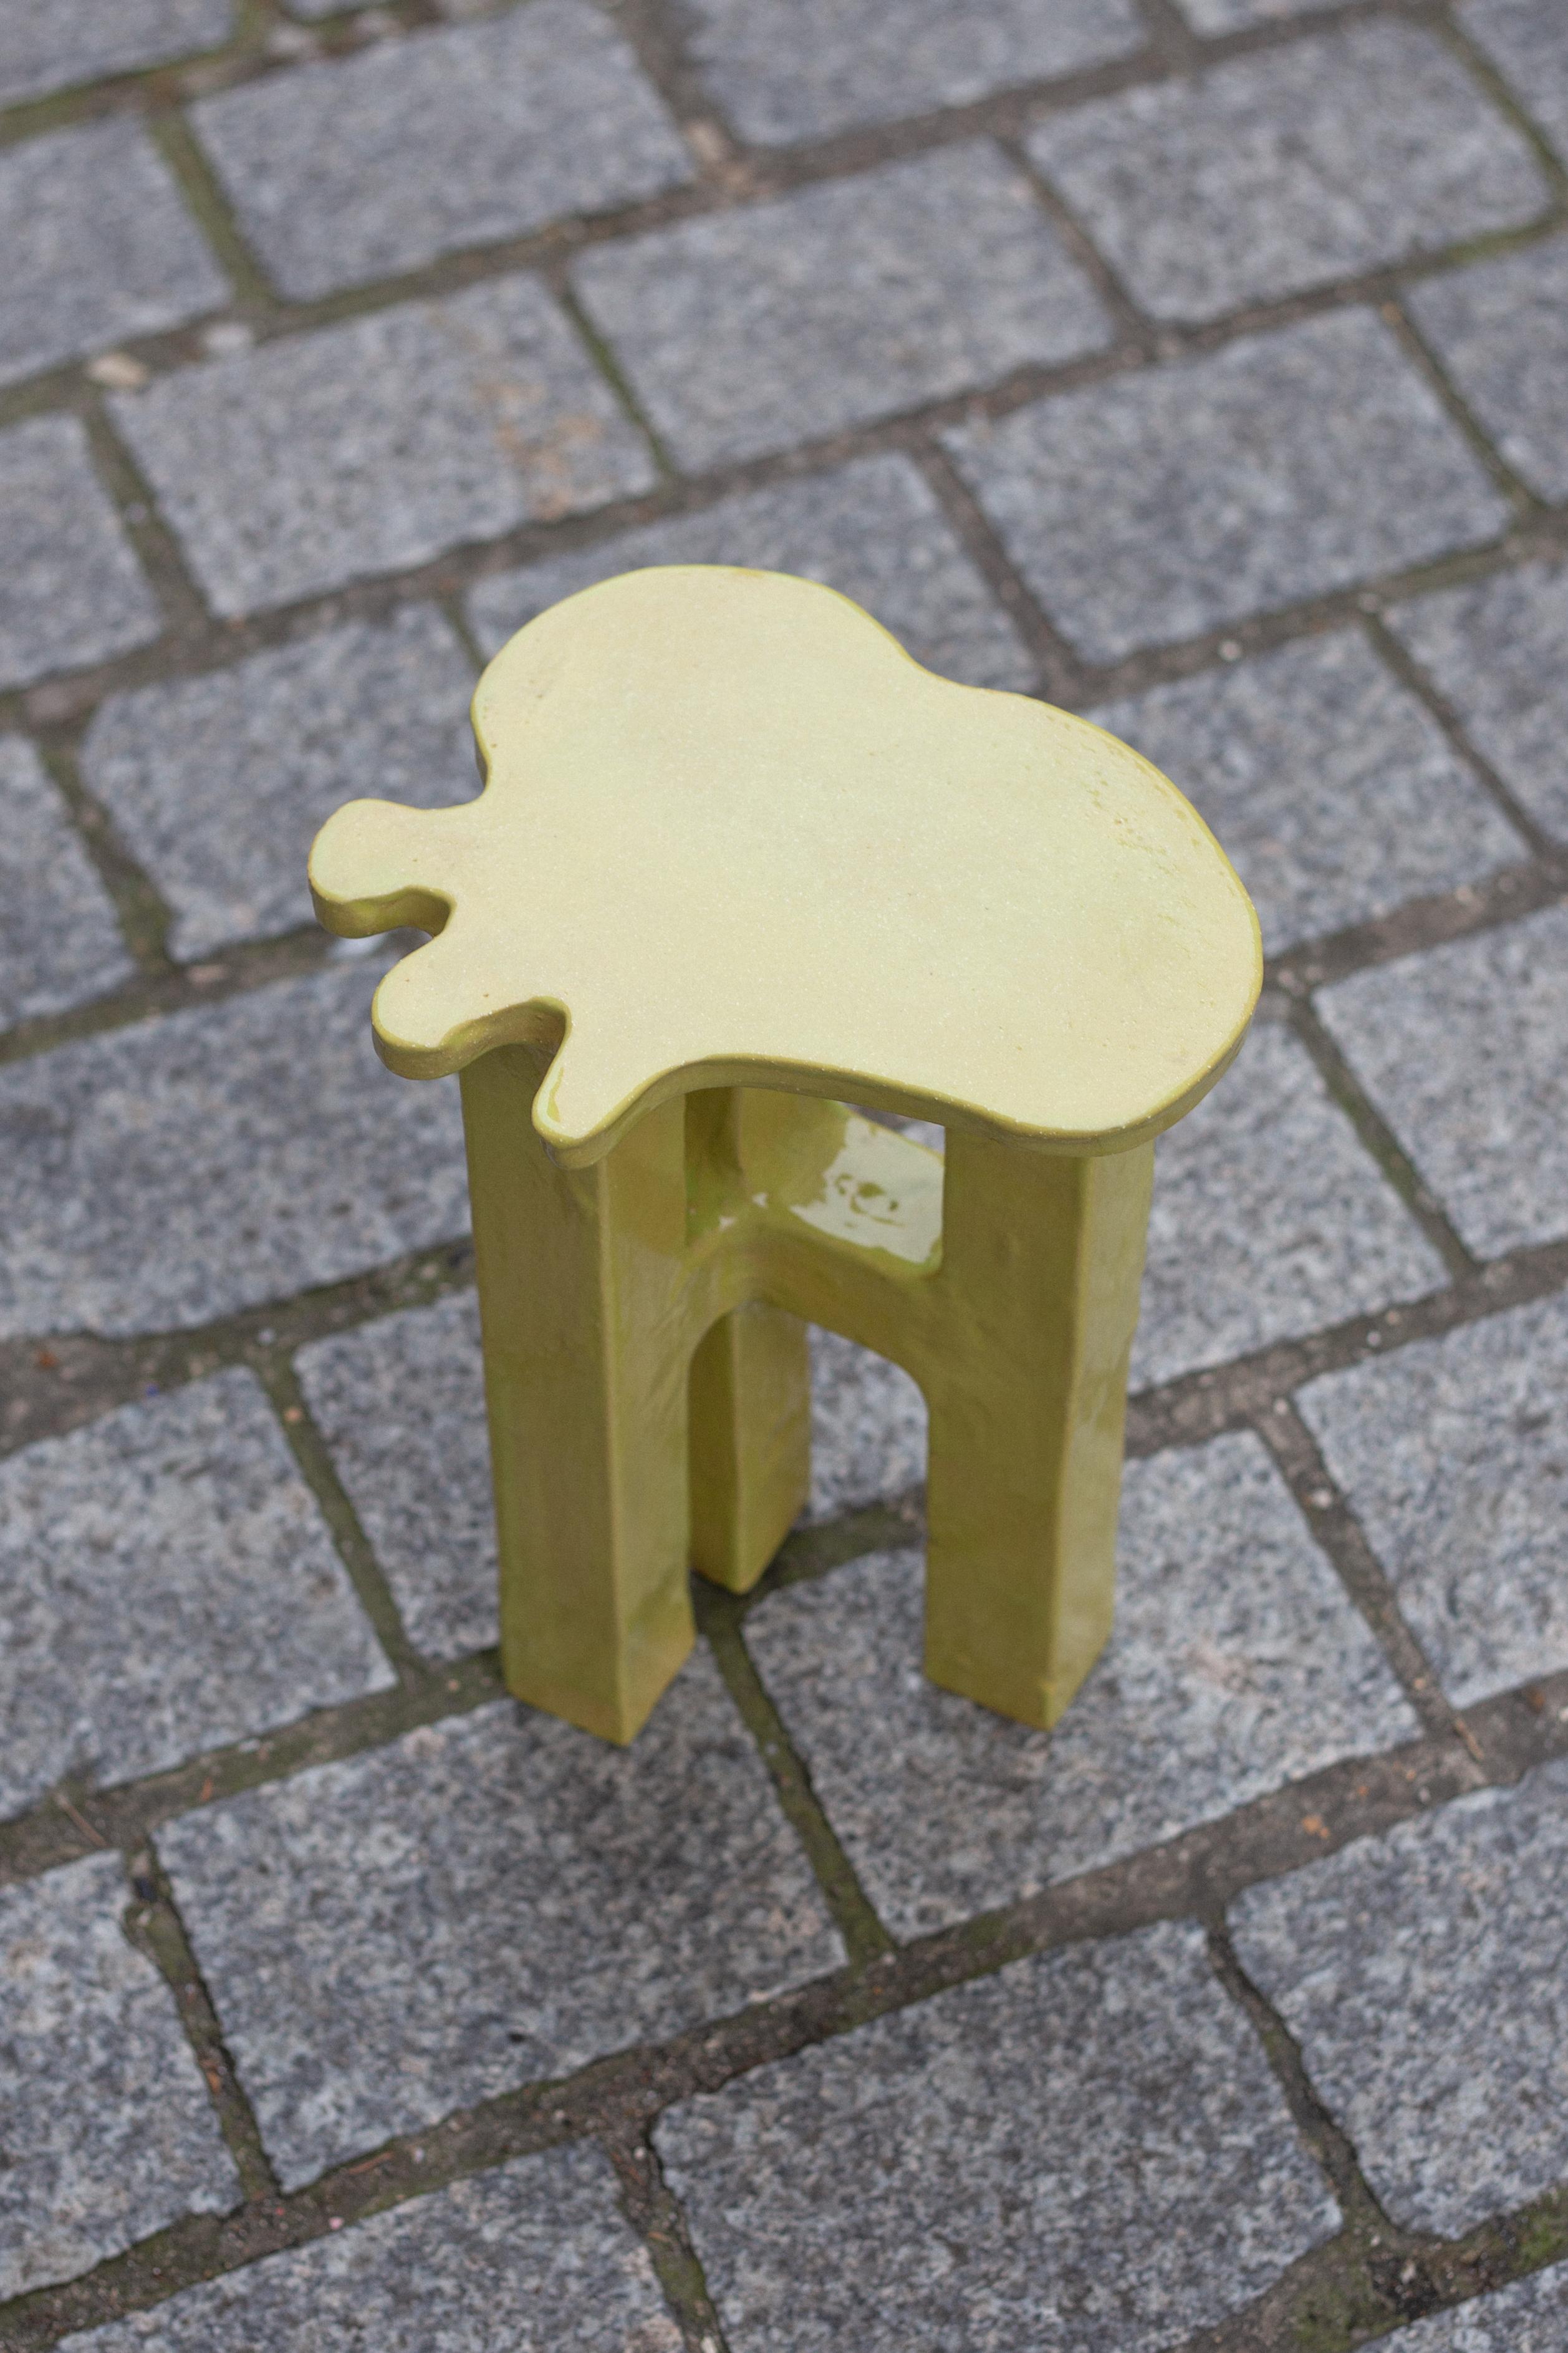 Unique yellow stoneware splash stool by Mesut Öztürk.
Dimensions:  W 24 x D 22 x  H 40 cm.
Materials: stoneware.

Splash side tables are the outcomes of the experiments for an aesthetic pursuit on coupling of contradictions: Minimal designs with